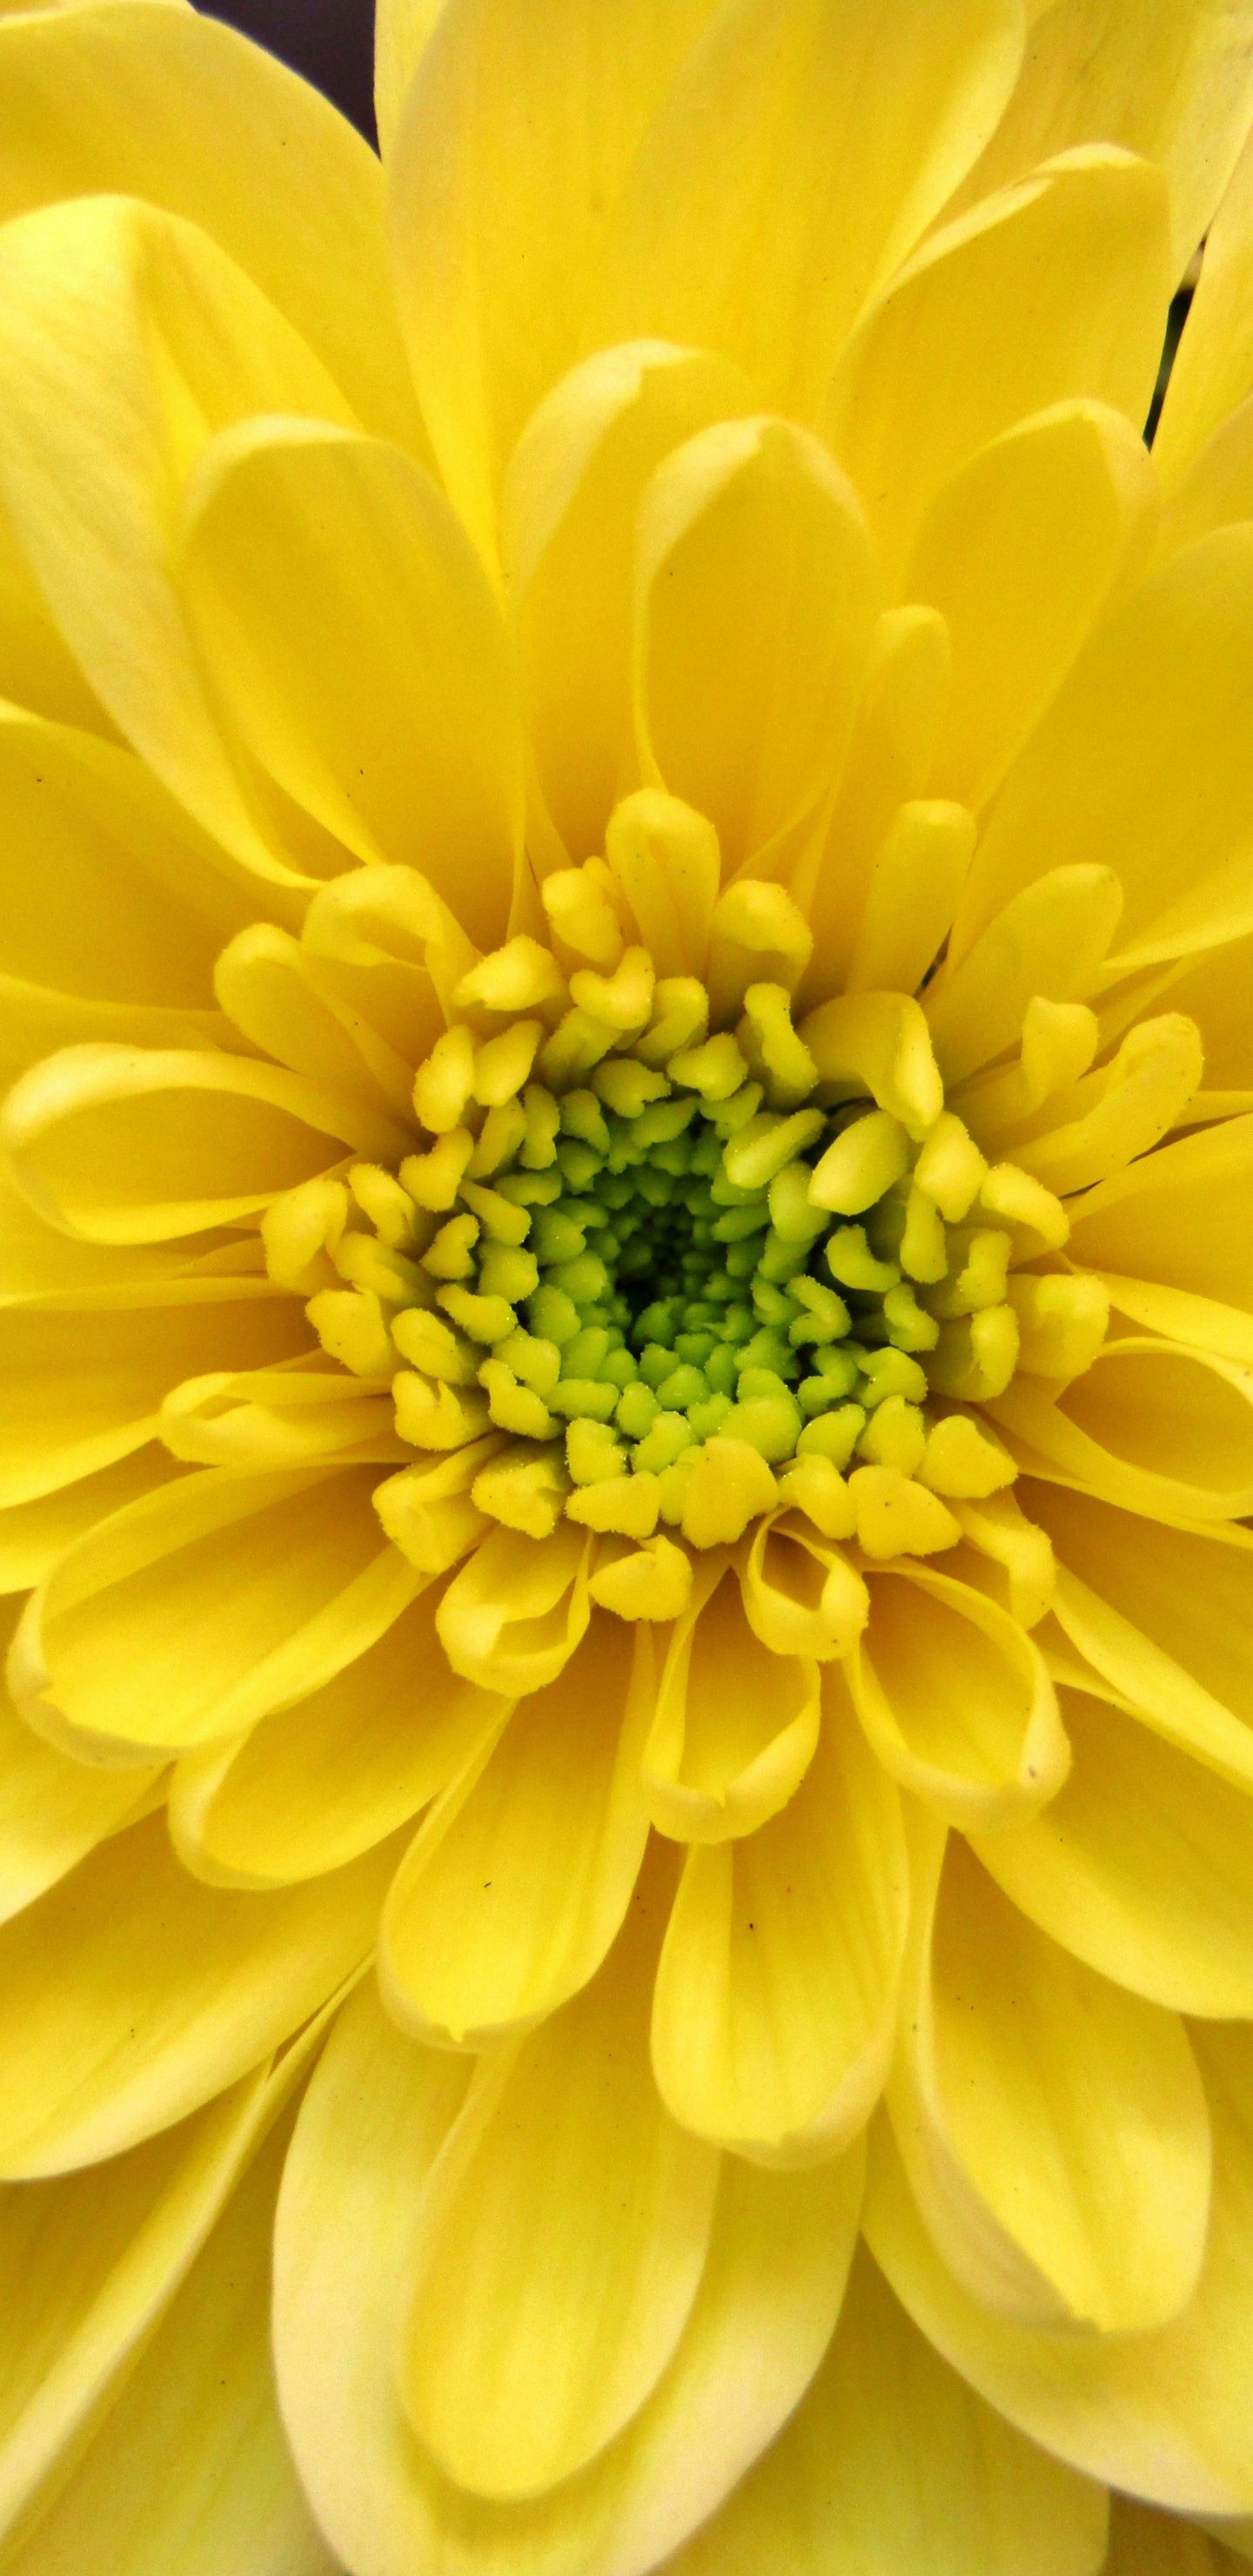 1440x2960 Dahlia, yellow, close up wallpaper | Beautiful flowers pictures, Dahlia, Yellow flowers